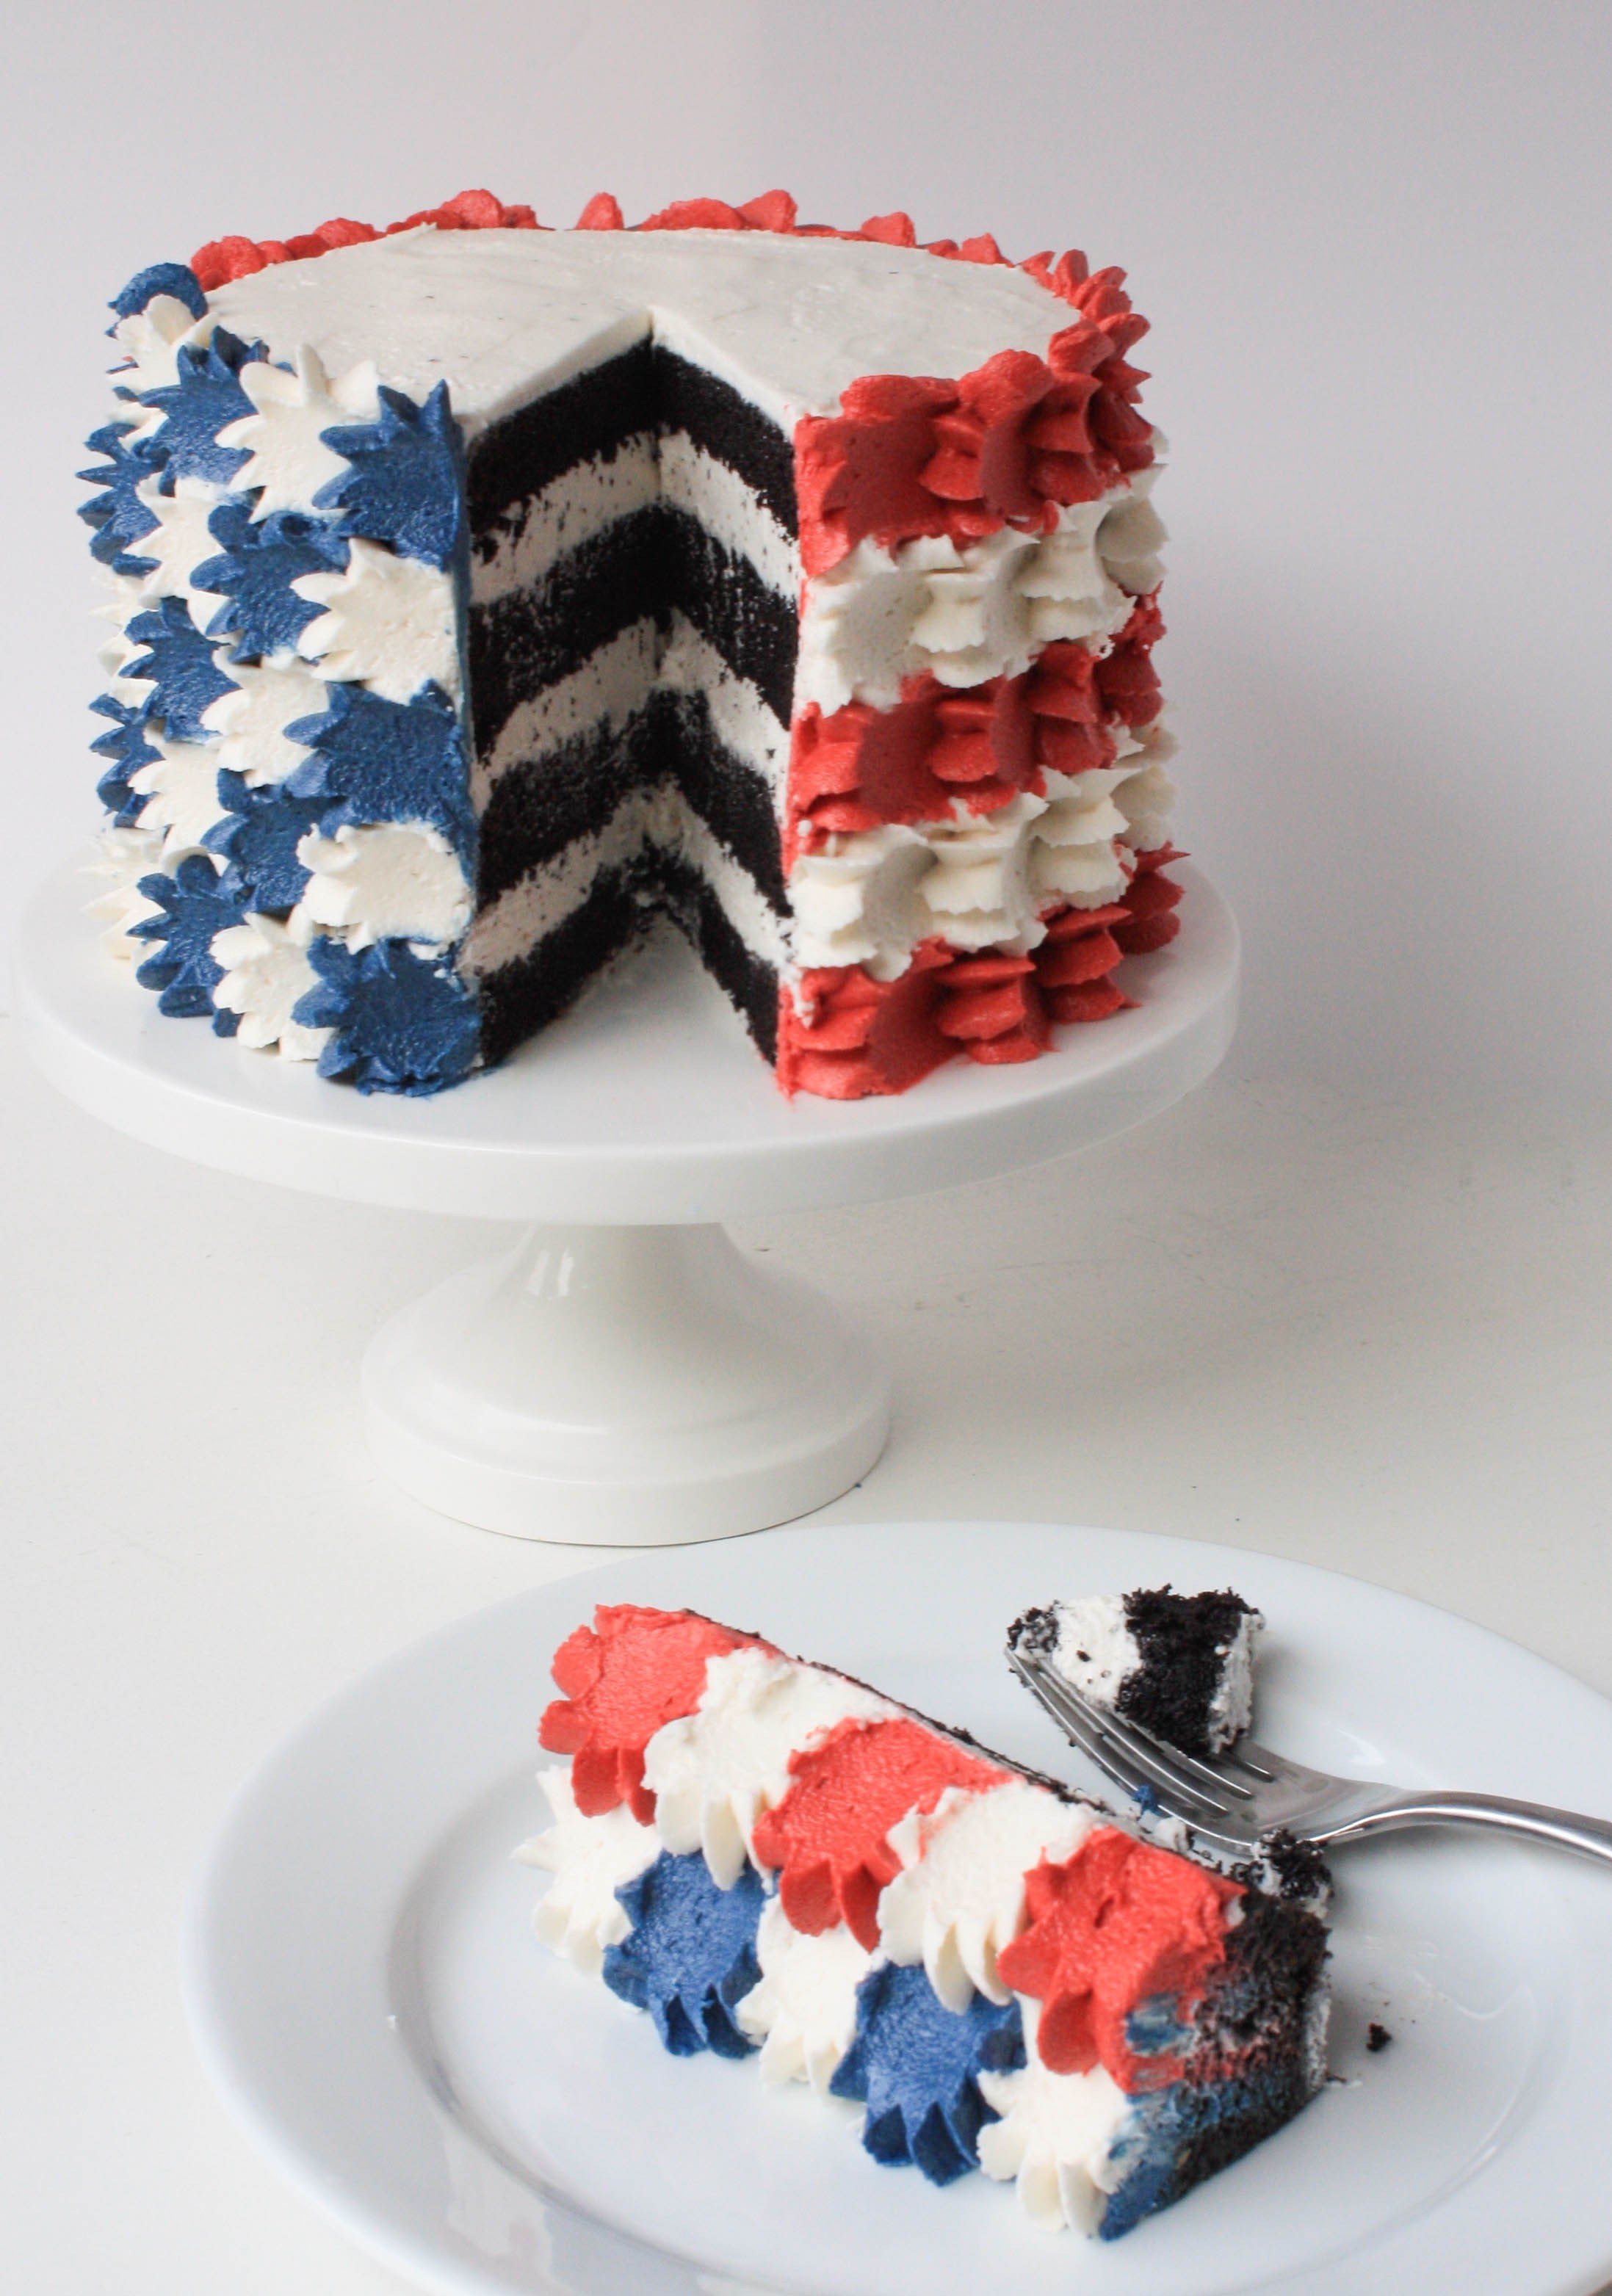 4th of July Stars and Stripes Cake